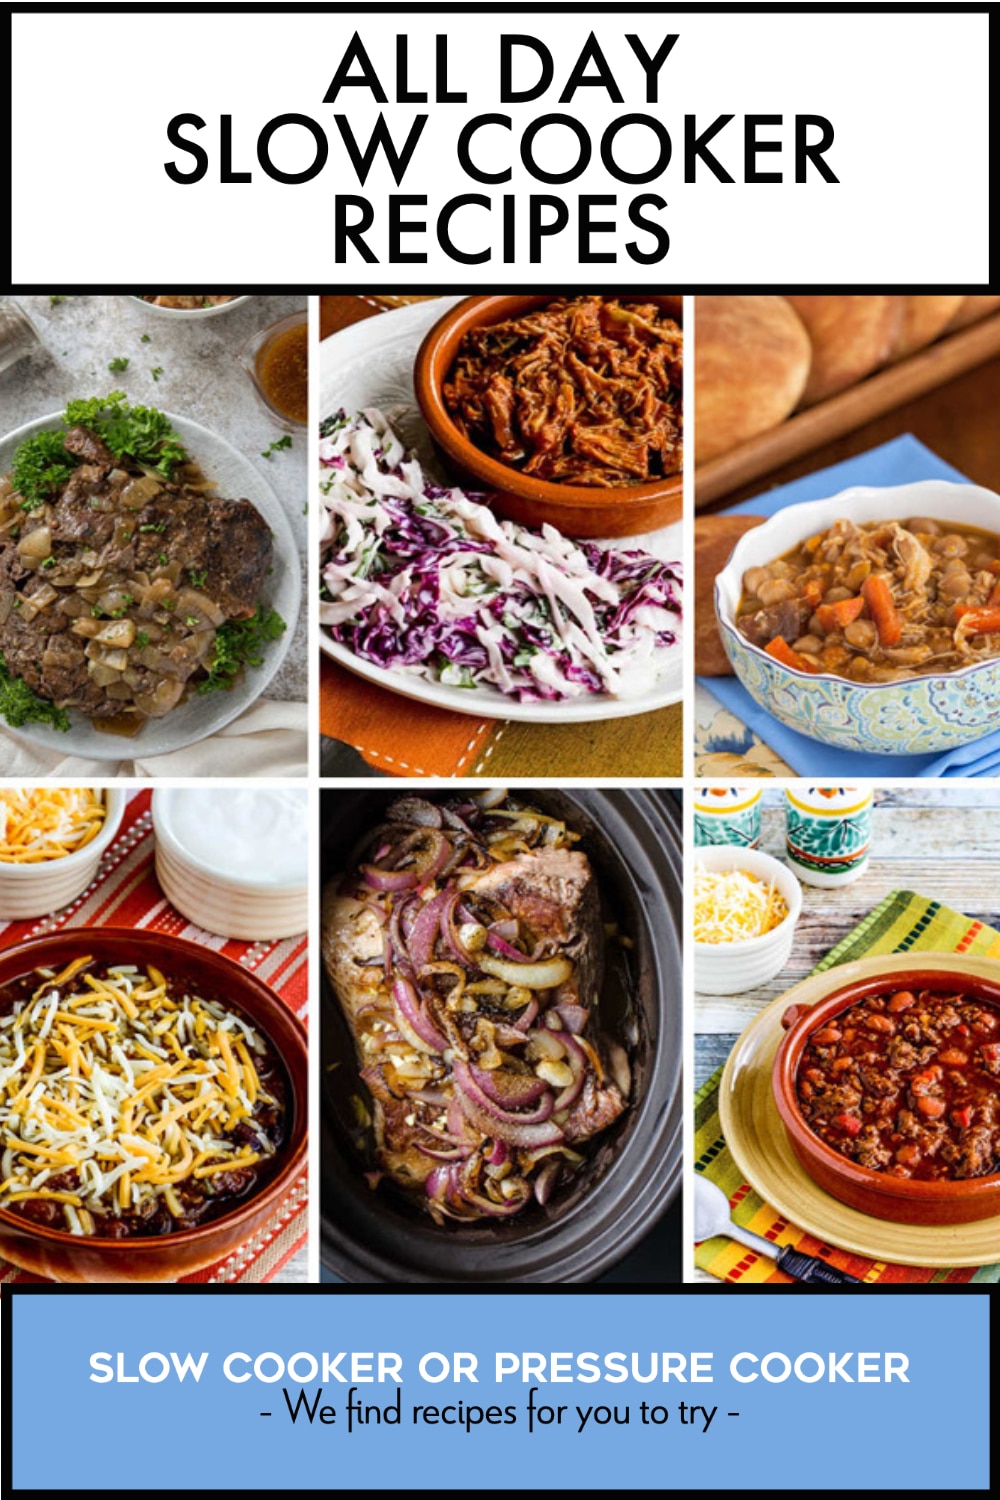 Pinterest image of All Day Slow Cooker Recipes